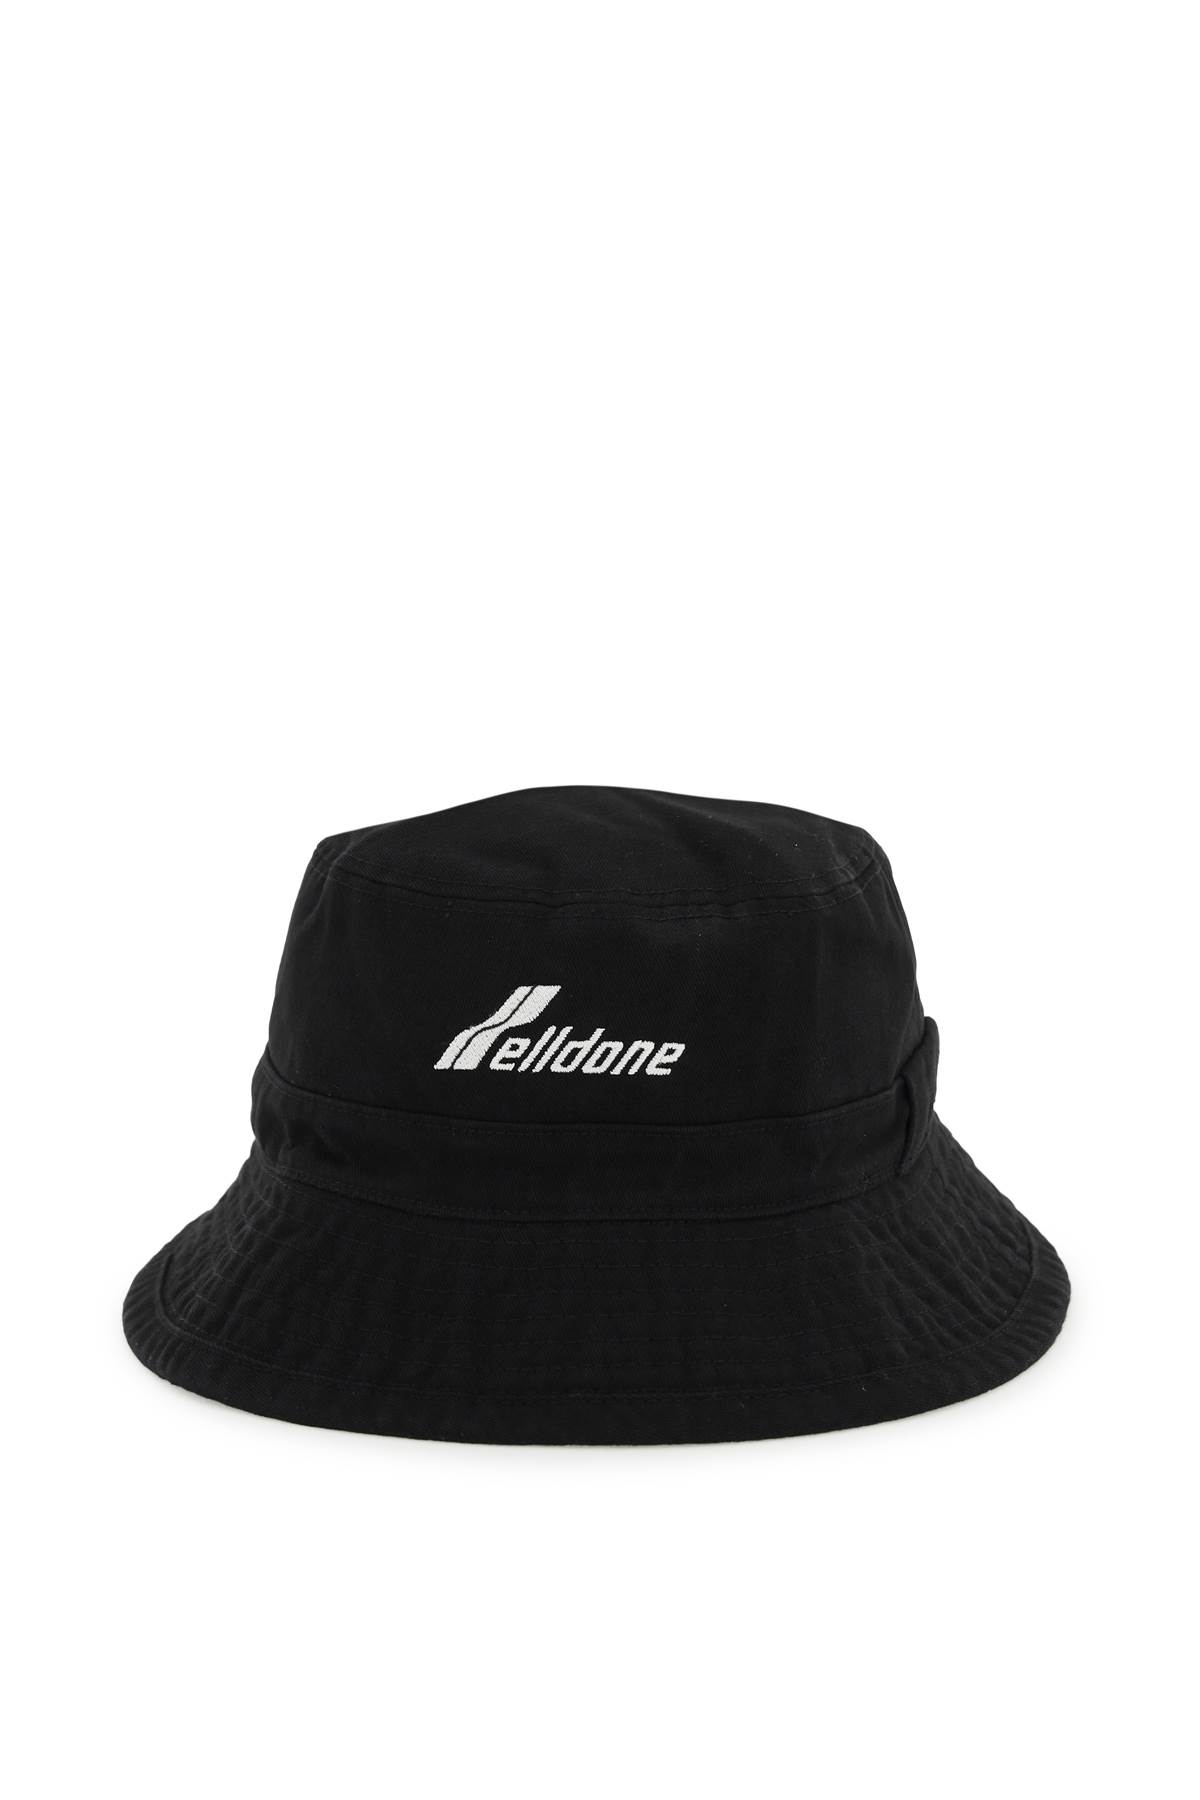 WE11 DONE Logo Embroidery Bucket Hat